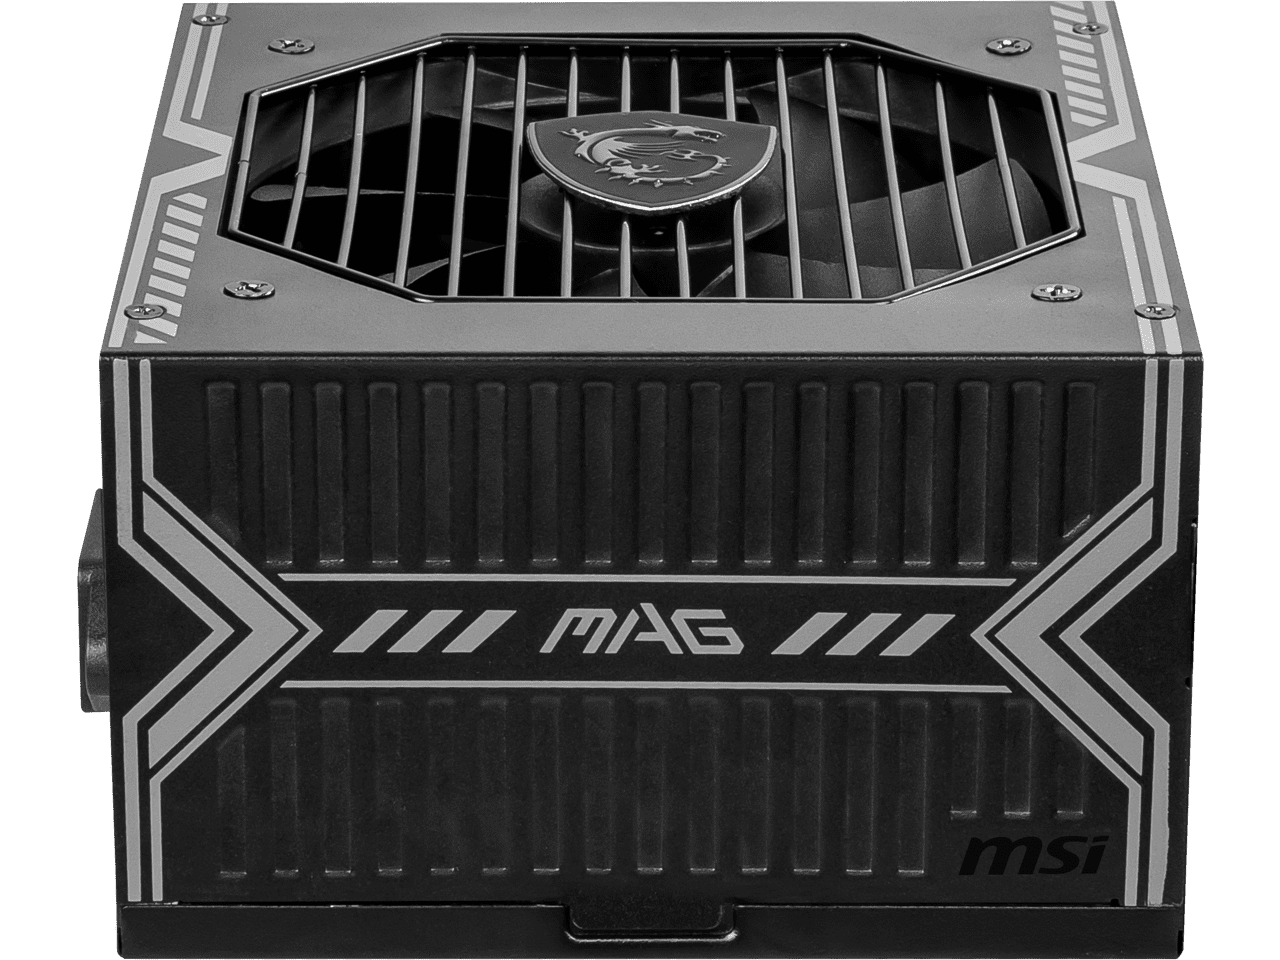 NEW MSI MAG A650BN Psu 650W power supply 5YEAR WARRANTY compatible Amd  Ryzen Intel CPU PC PWR MIDRANGE TIER Atx mAtx itx, Computers & Tech, Parts  & Accessories, Computer Parts on Carousell